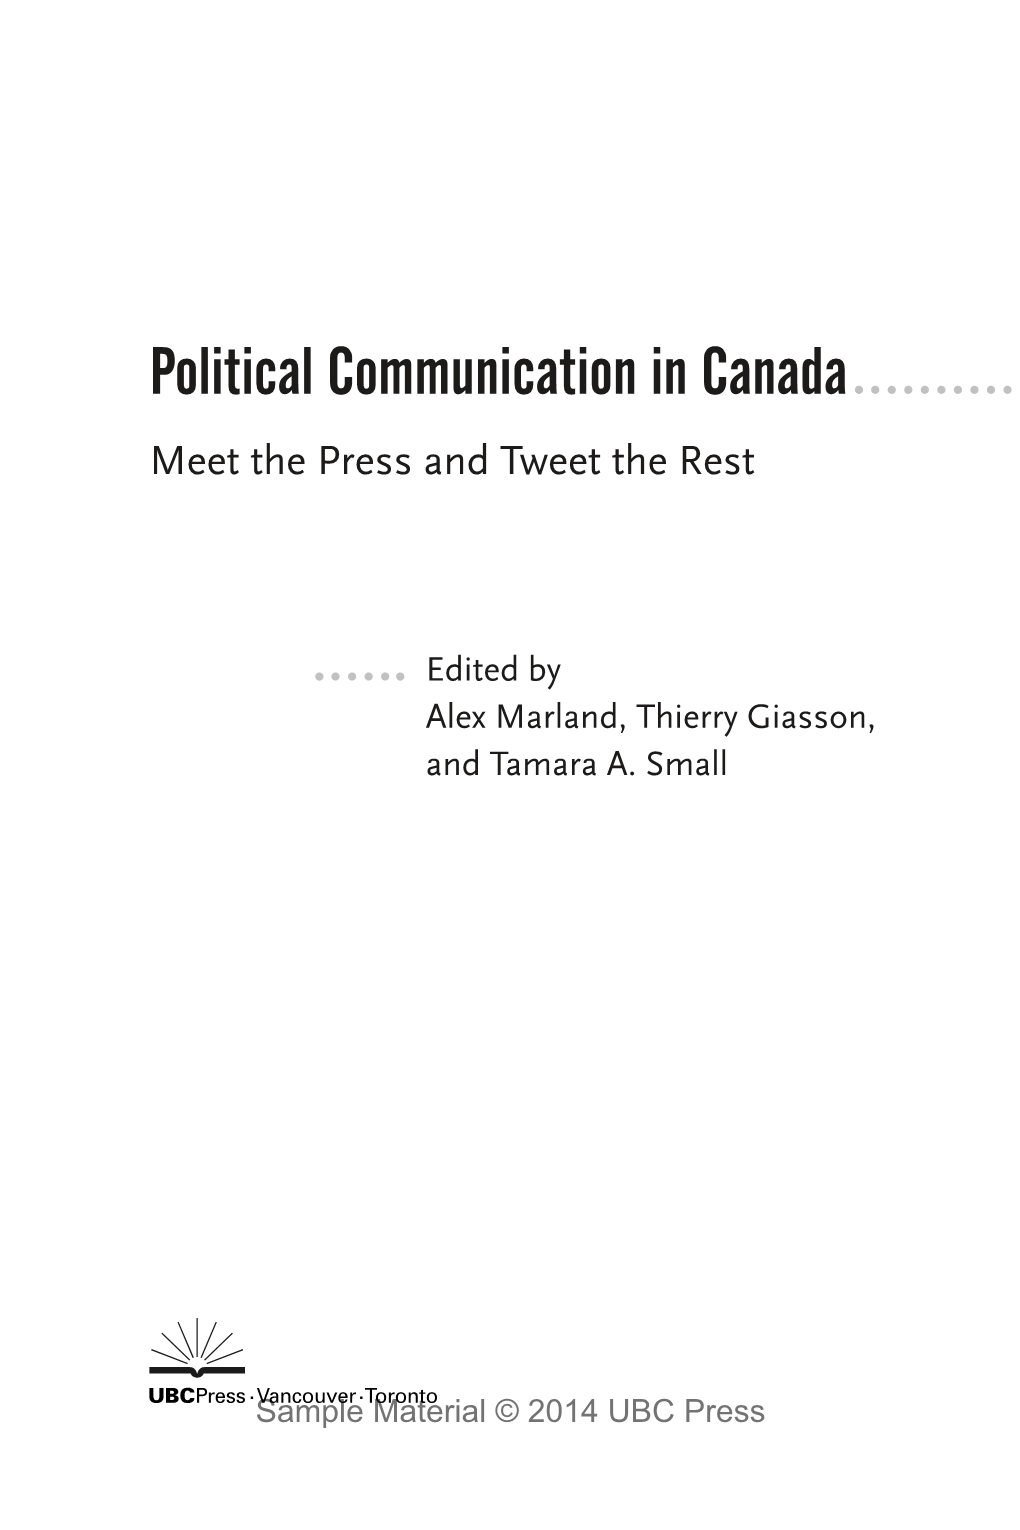 Political Communication in Canada Meet the Press and Tweet the Rest